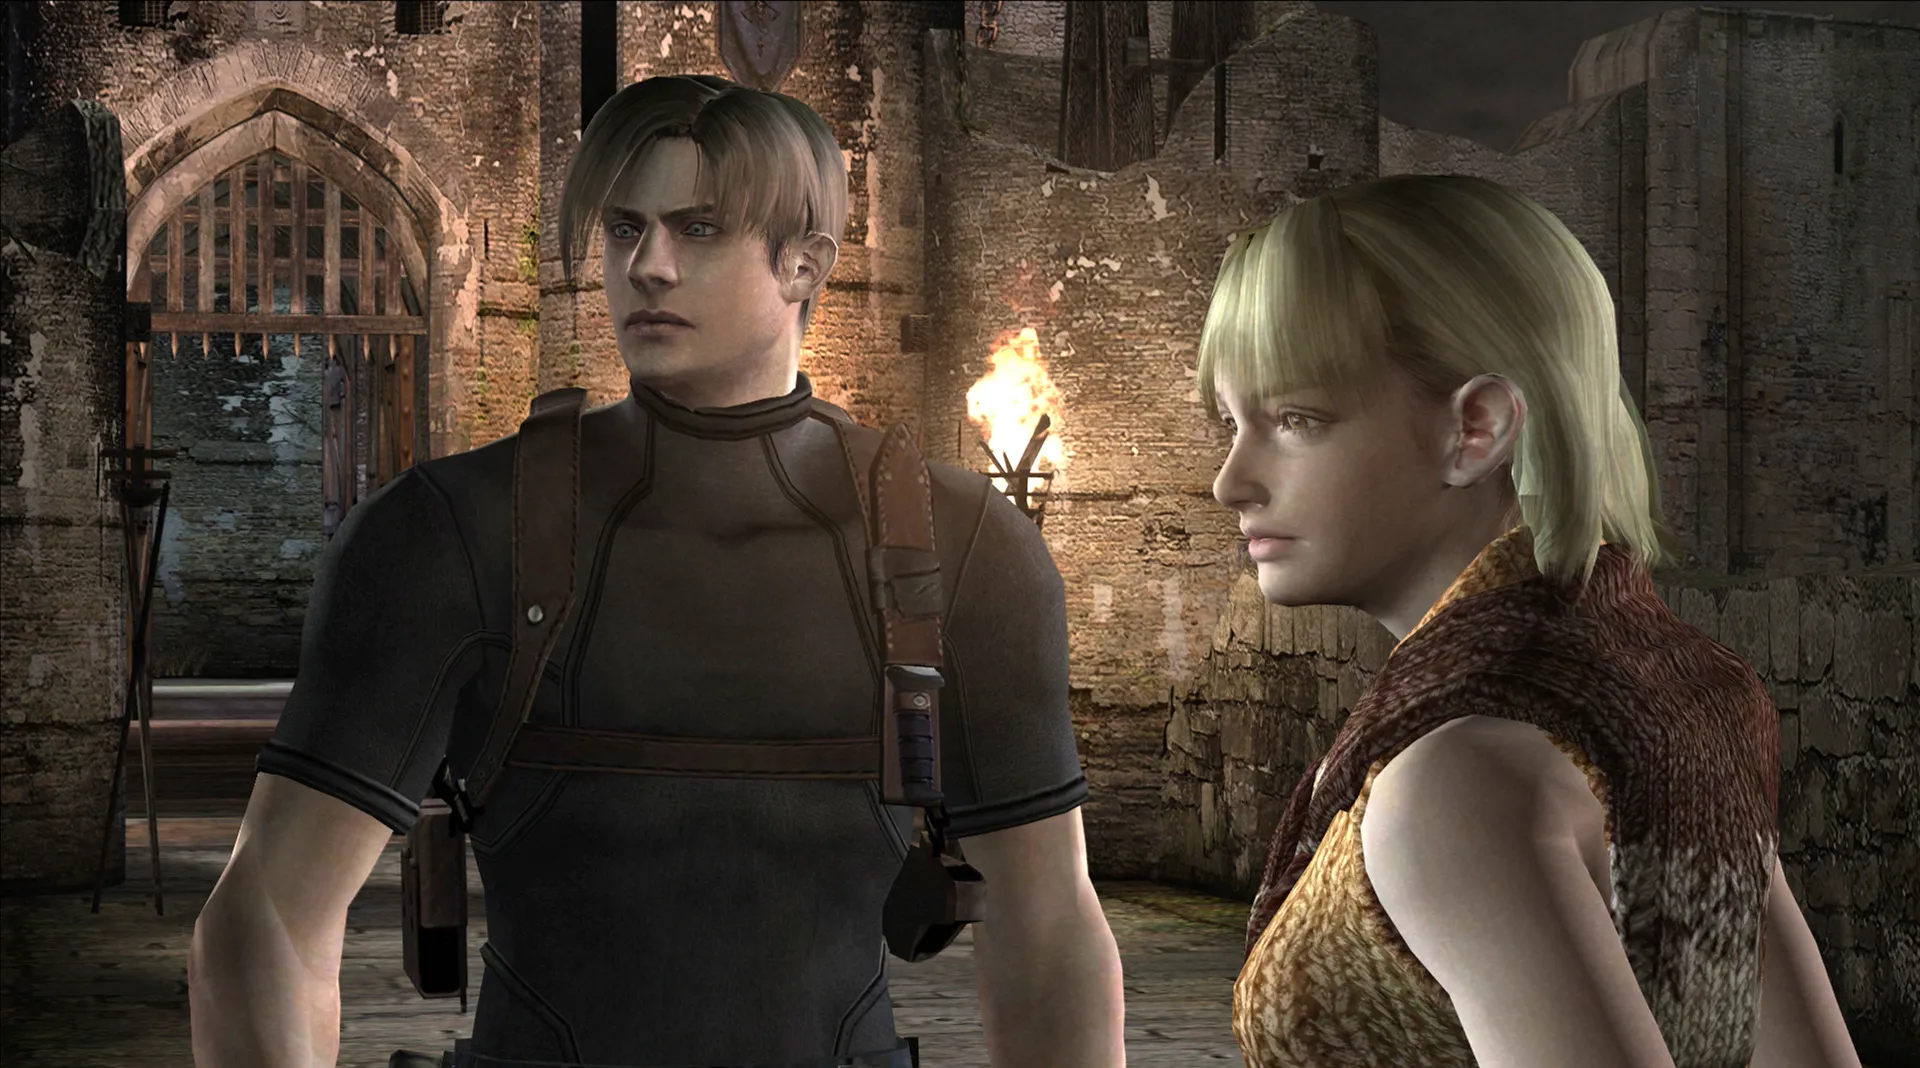 Resident Evil 4 Remake Launching On PS4, But Not Xbox One